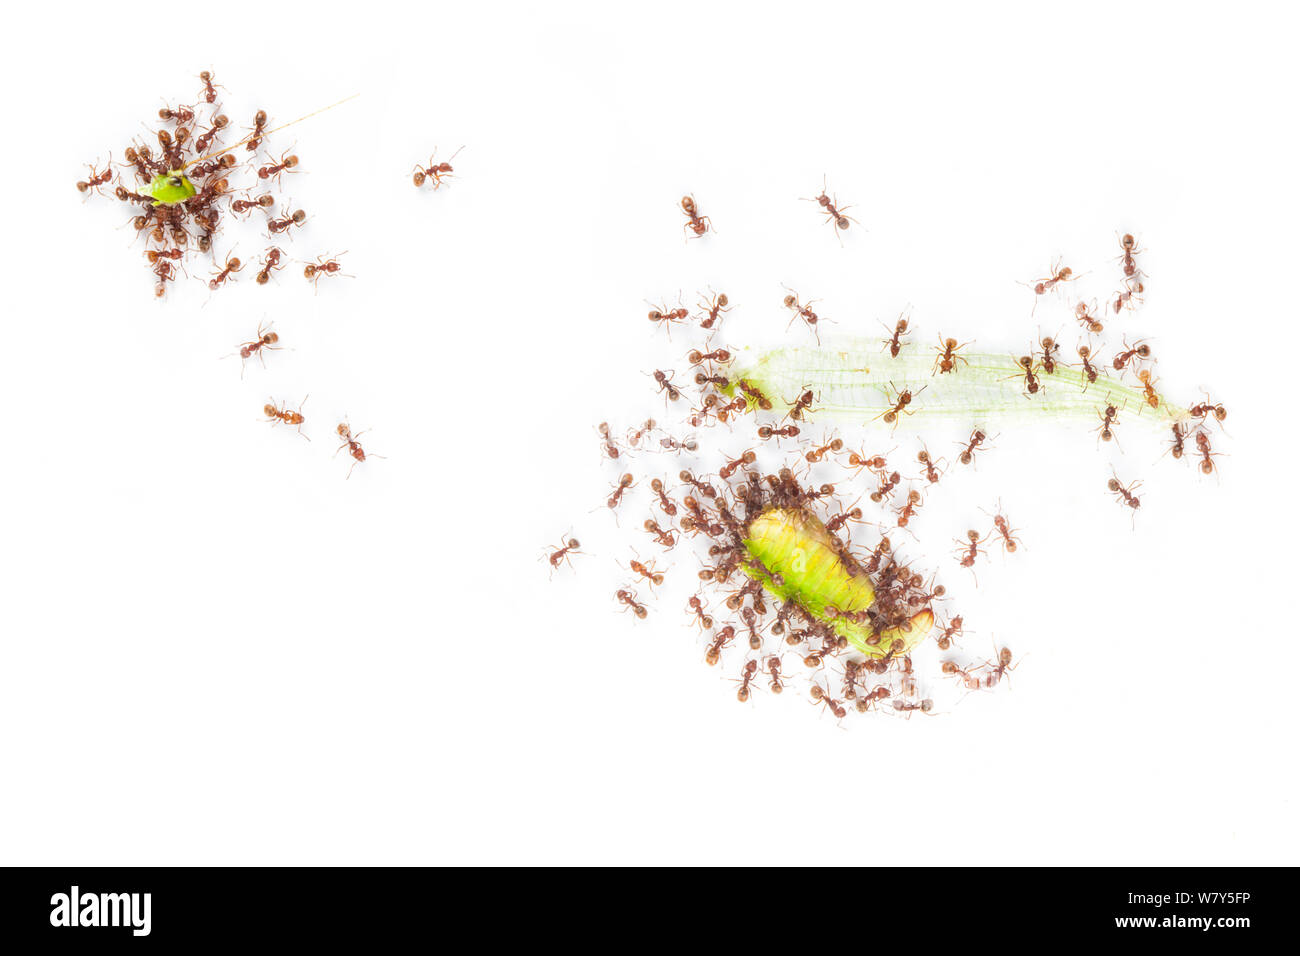 Ants (Formicidae) dismembering a dead cricket. Danum Valley, Sabah, Borneo. Sequence 4/4. Stock Photo